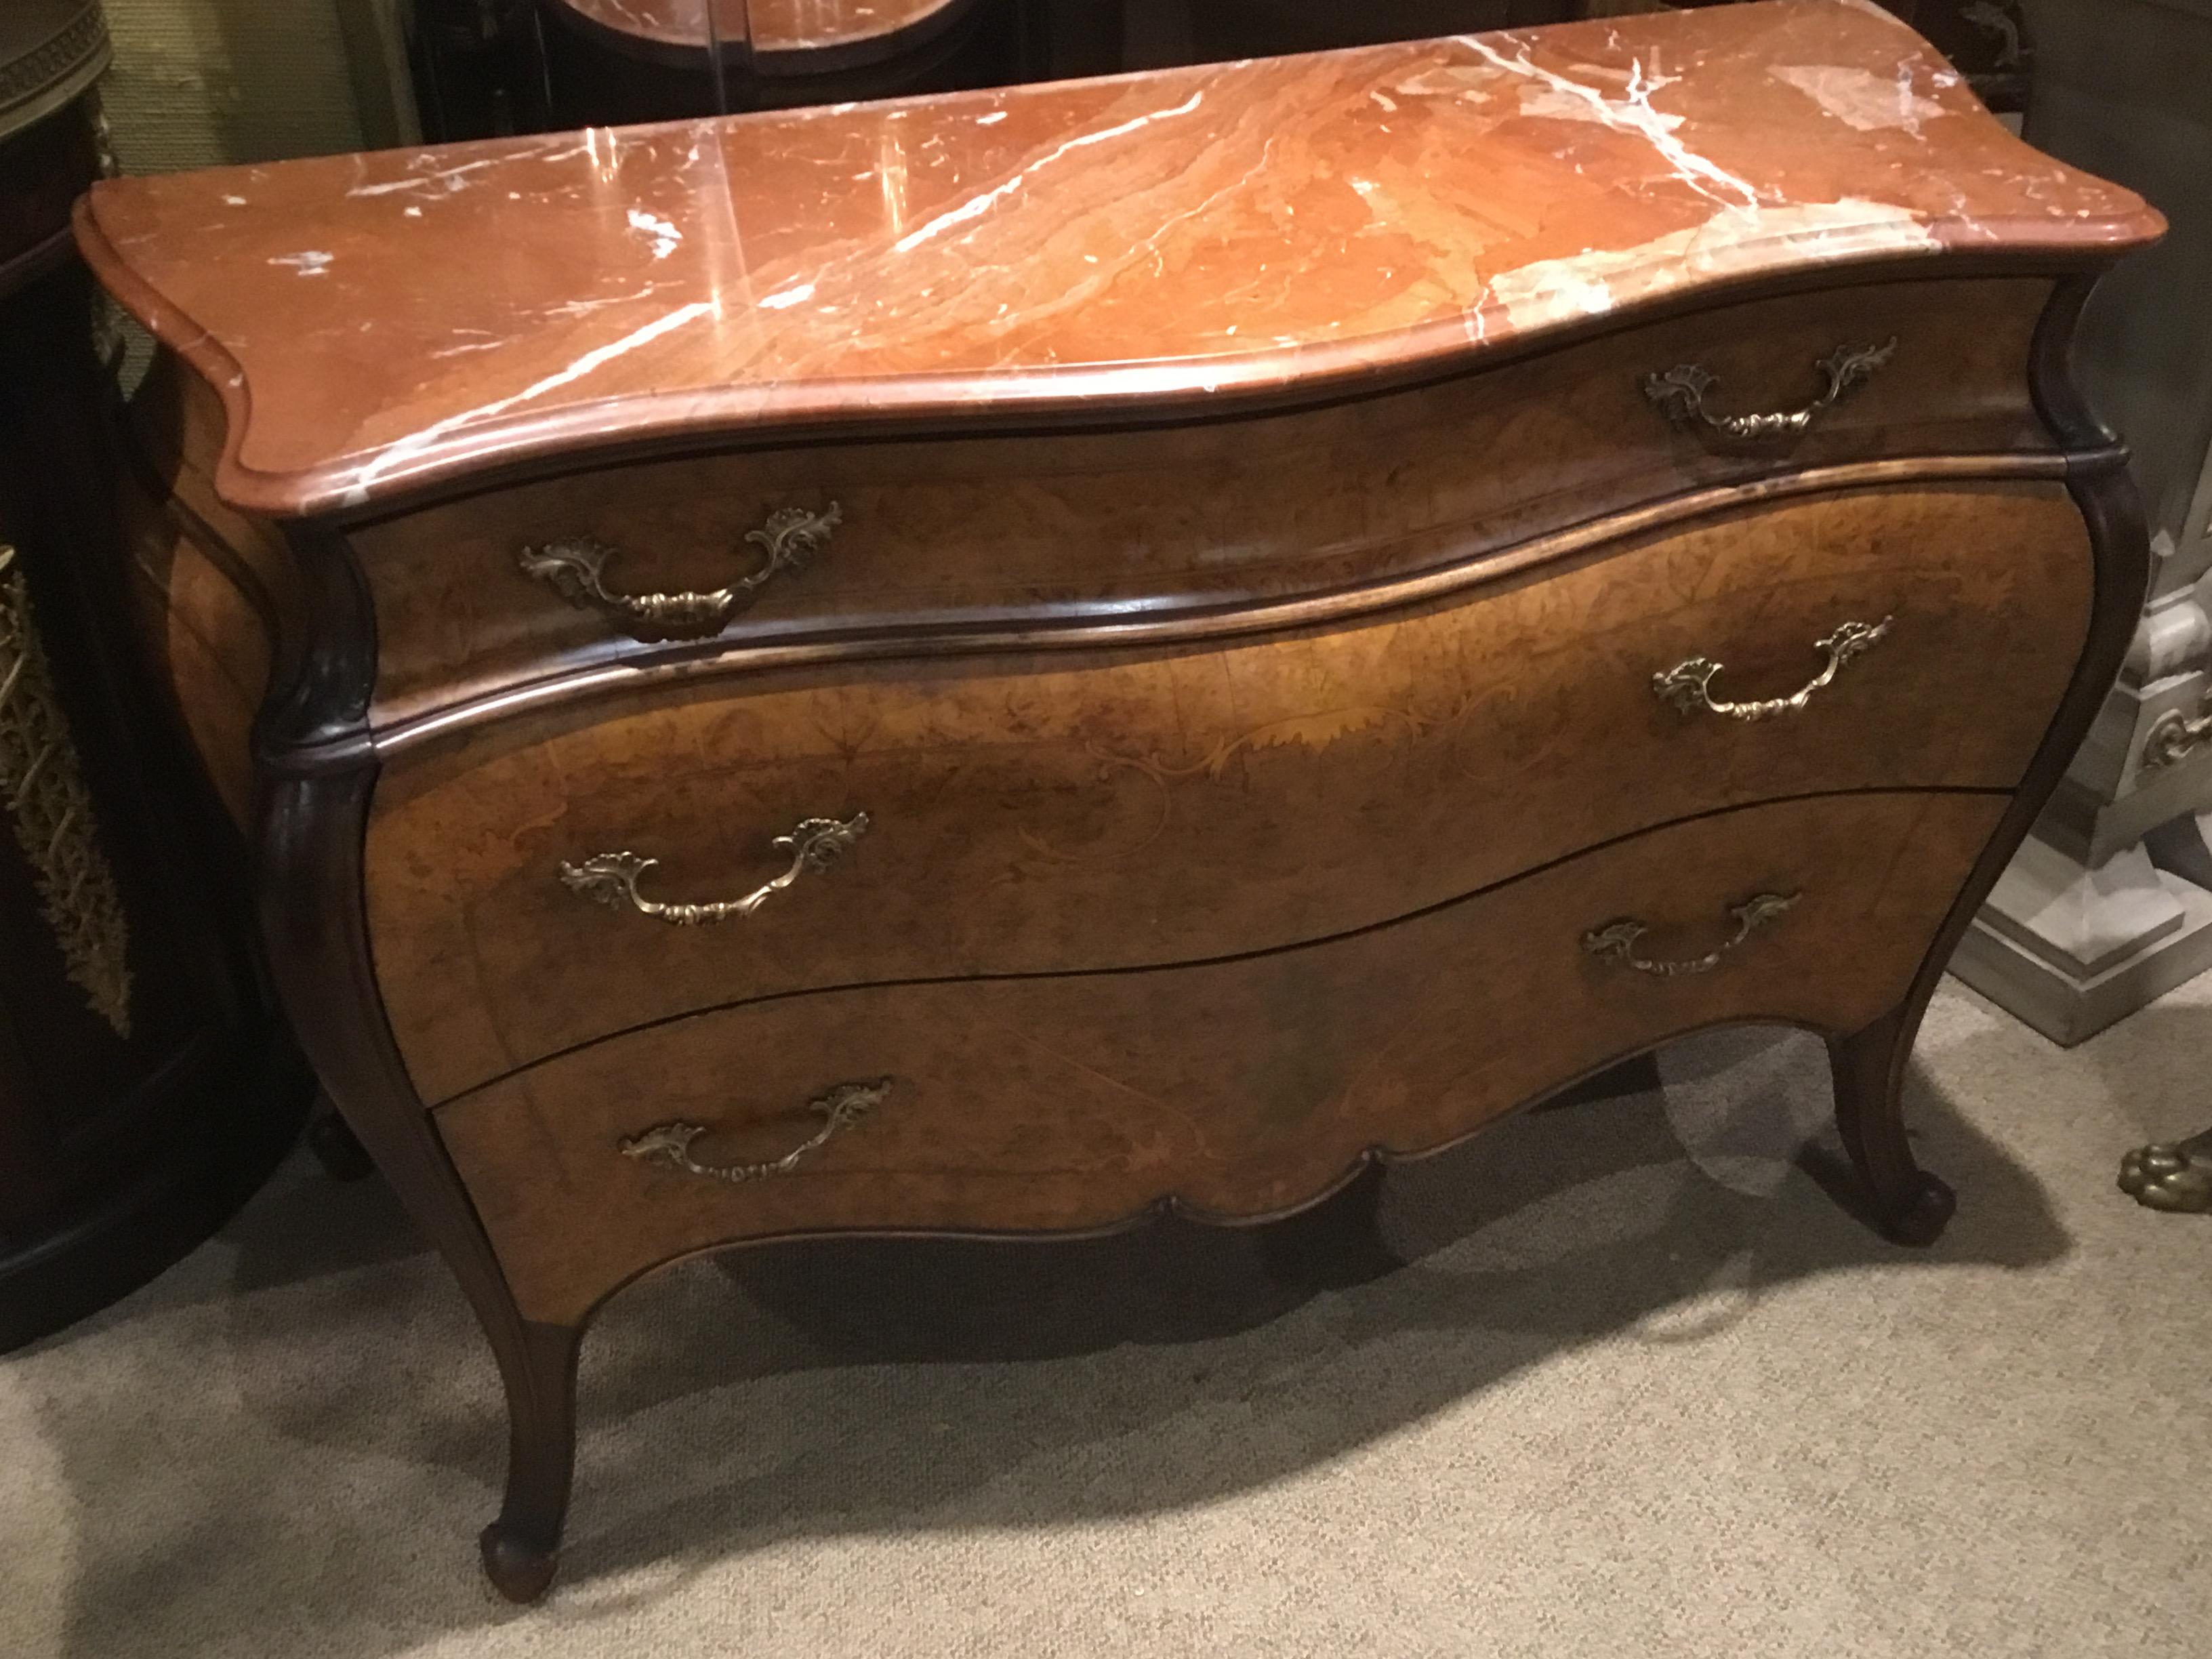 Handsome bombe’ form commode in a burl wood case fitted with three drawers and
accented with scrolled marquetry rising on curled feet.